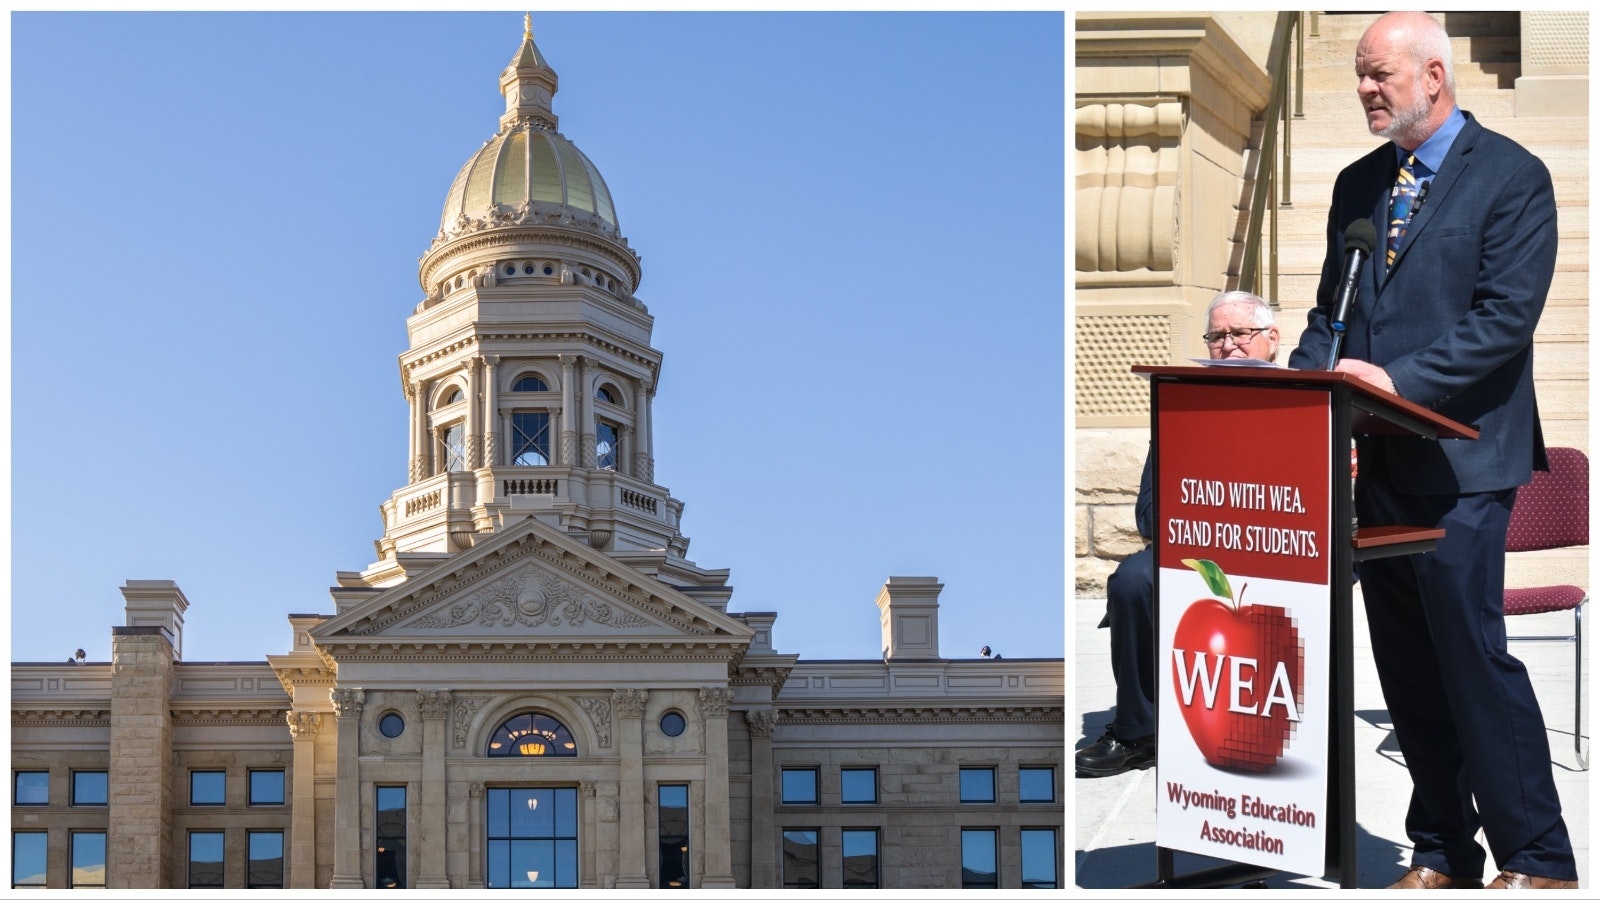 Wyoming education association and state capitol 5 2 23